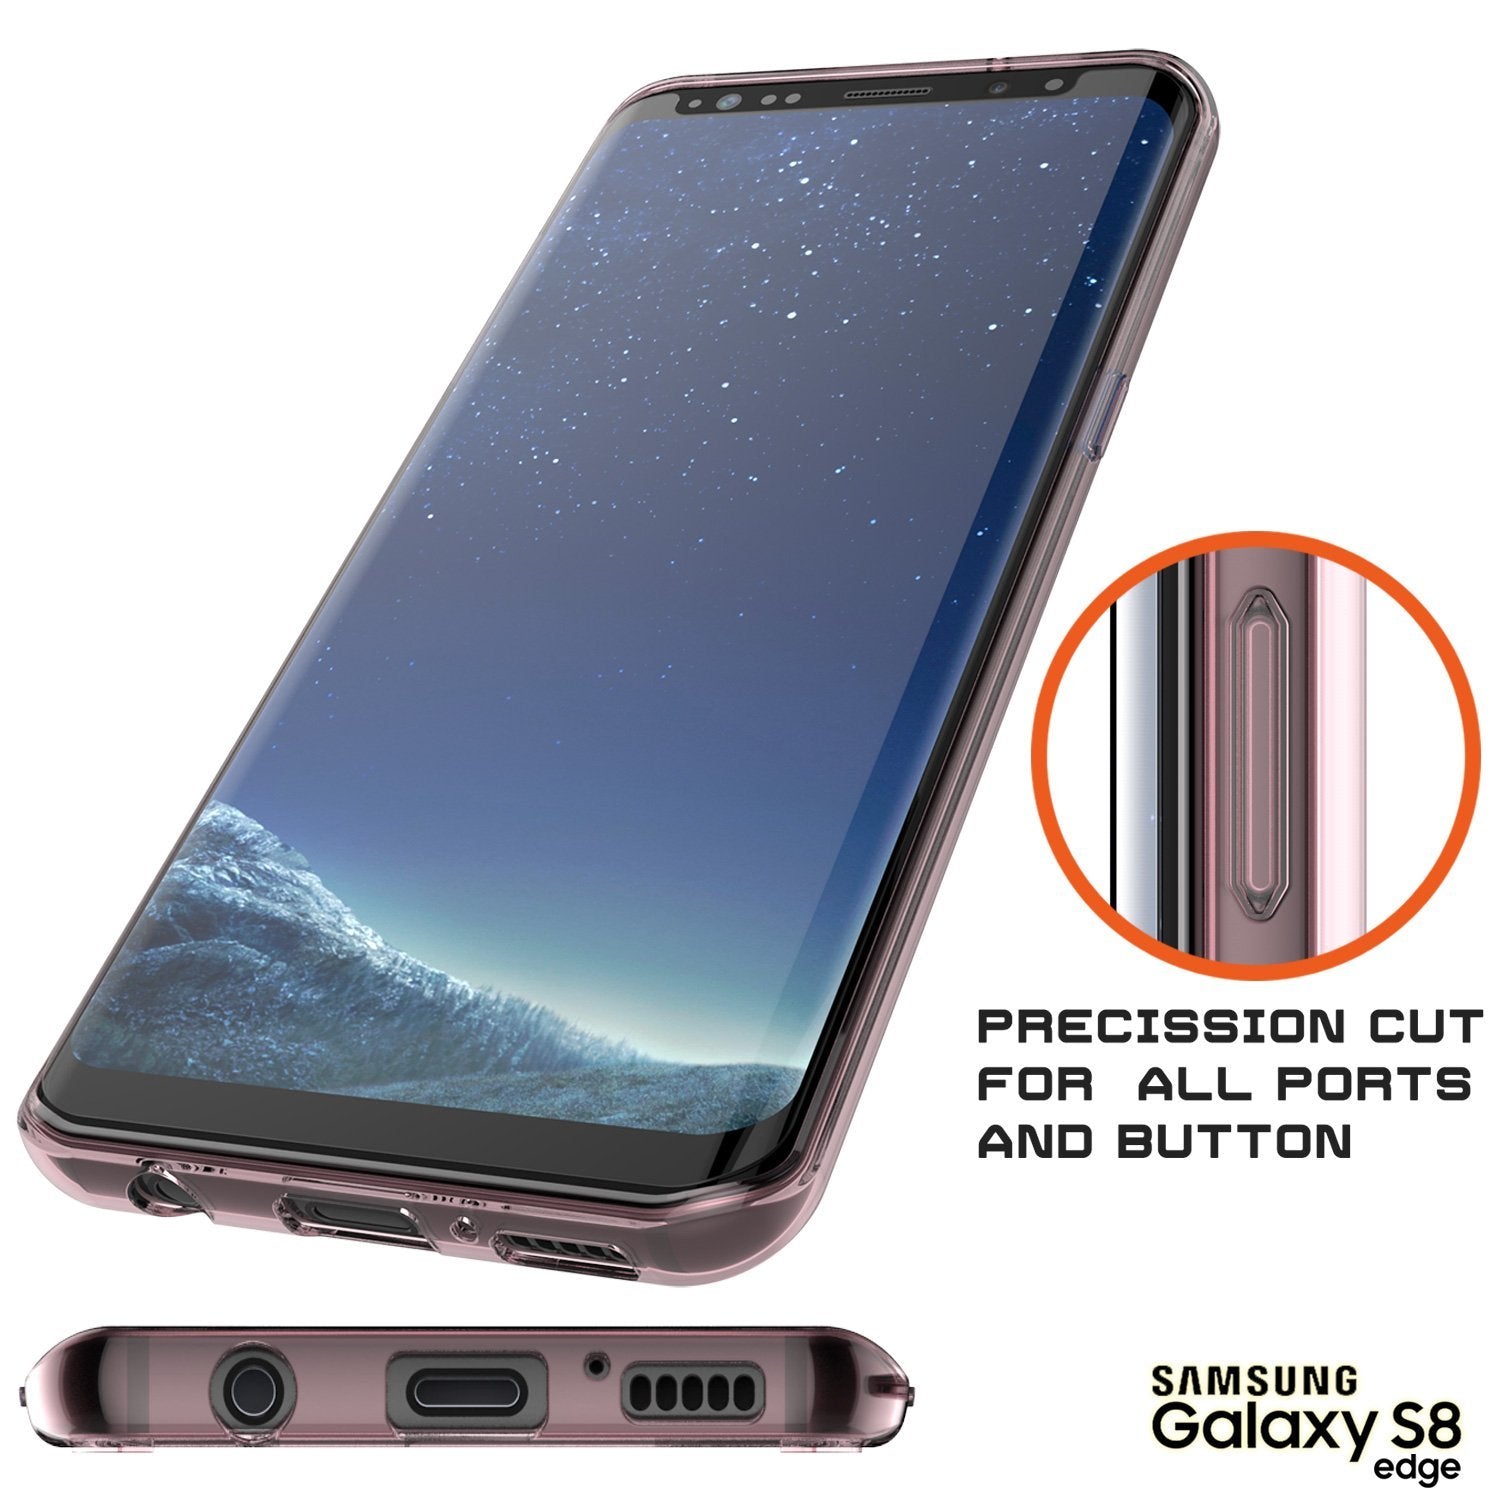 S8 Case Punkcase® LUCID 2.0 Crystal Pink Series w/ PUNK SHIELD Screen Protector | Ultra Fit - PunkCase NZ